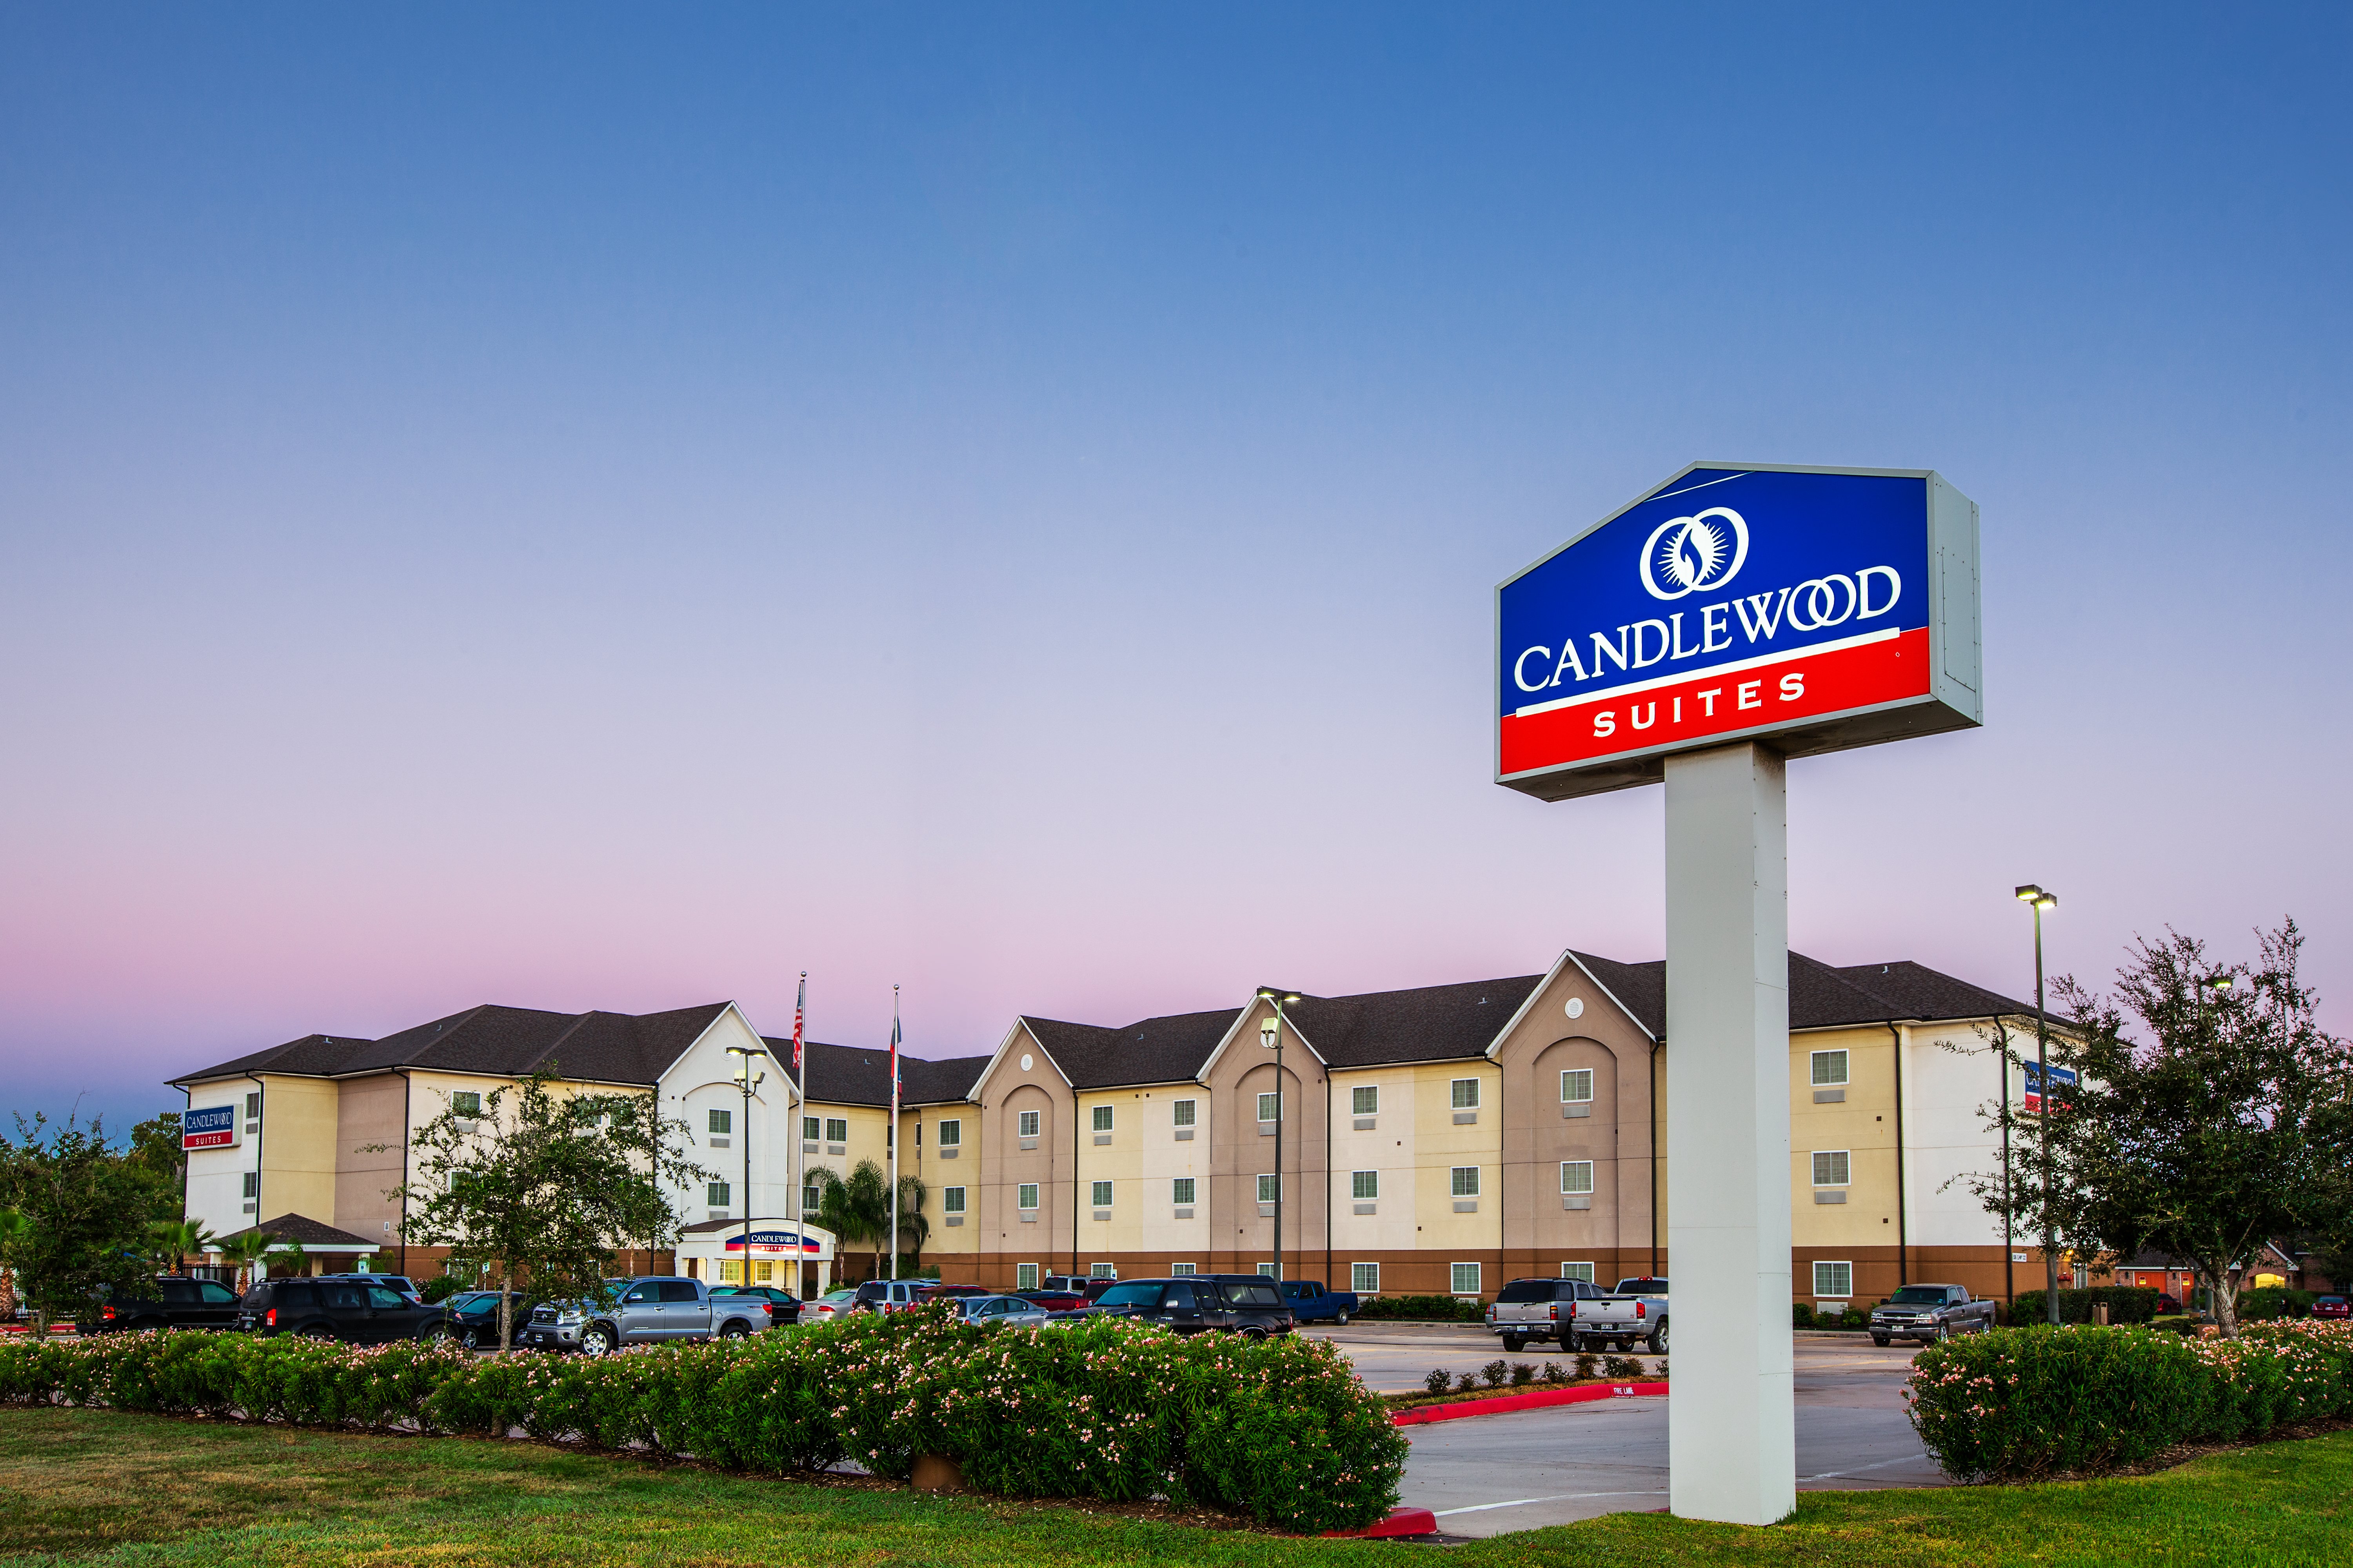 CANDLEWOOD SUITES HOUSTON NW - WILLOWBROOK, AN IHG HOTEL